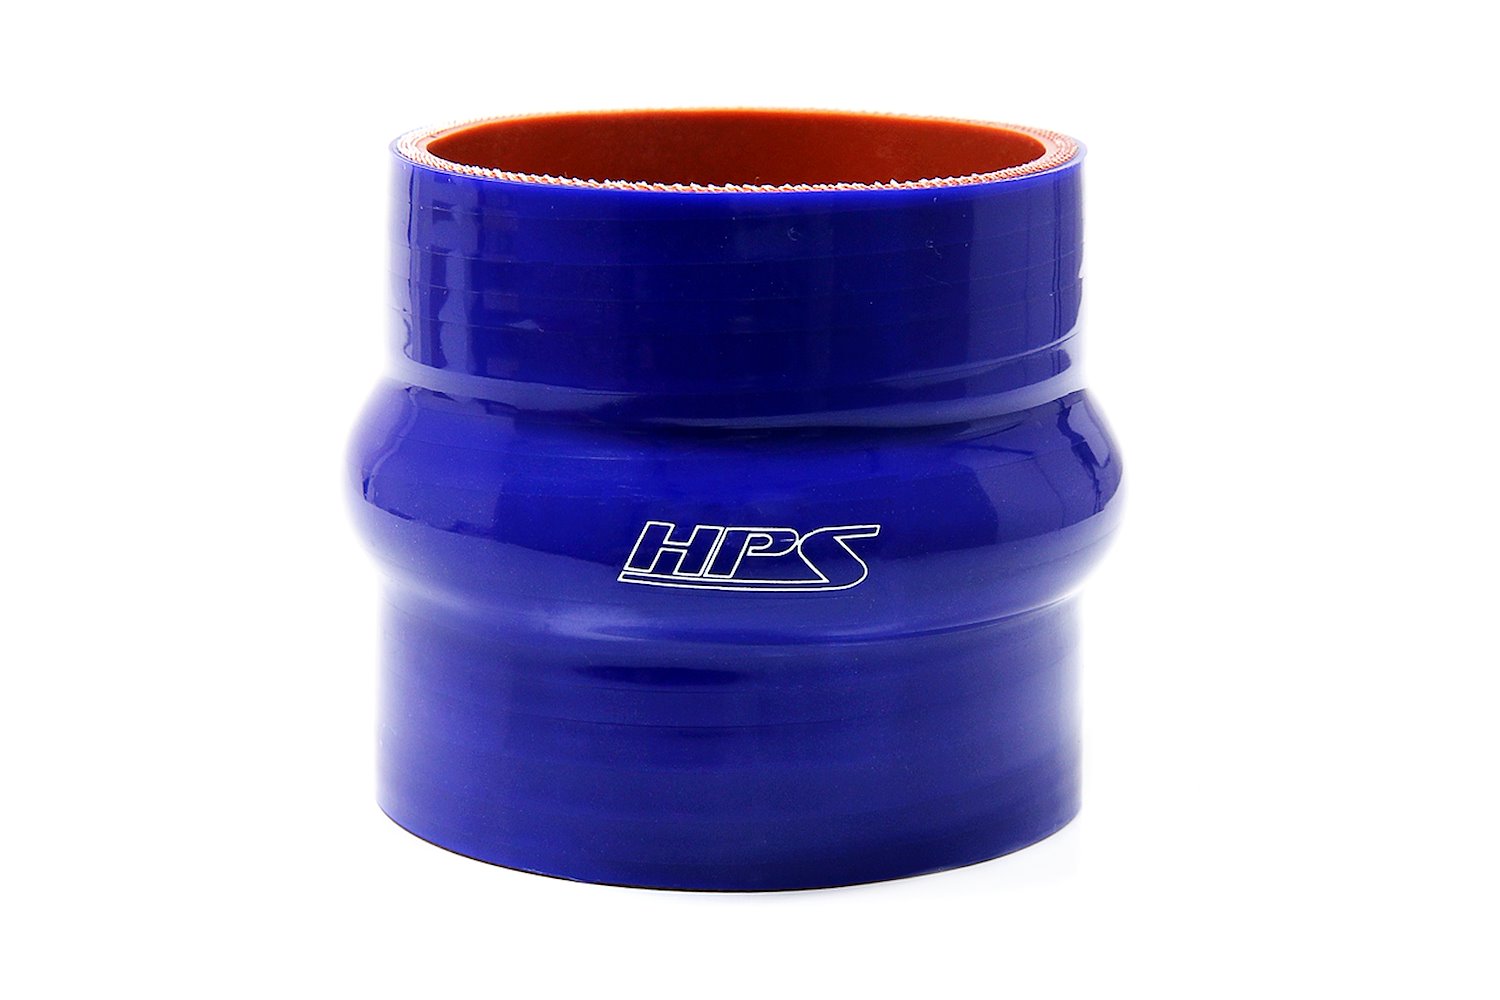 HTSHC-162-L6-BLUE Silicone Hump Coupler Hose, High-Temp 4-Ply Reinforced, 1-5/8 in. ID, 6 in. Long, Blue